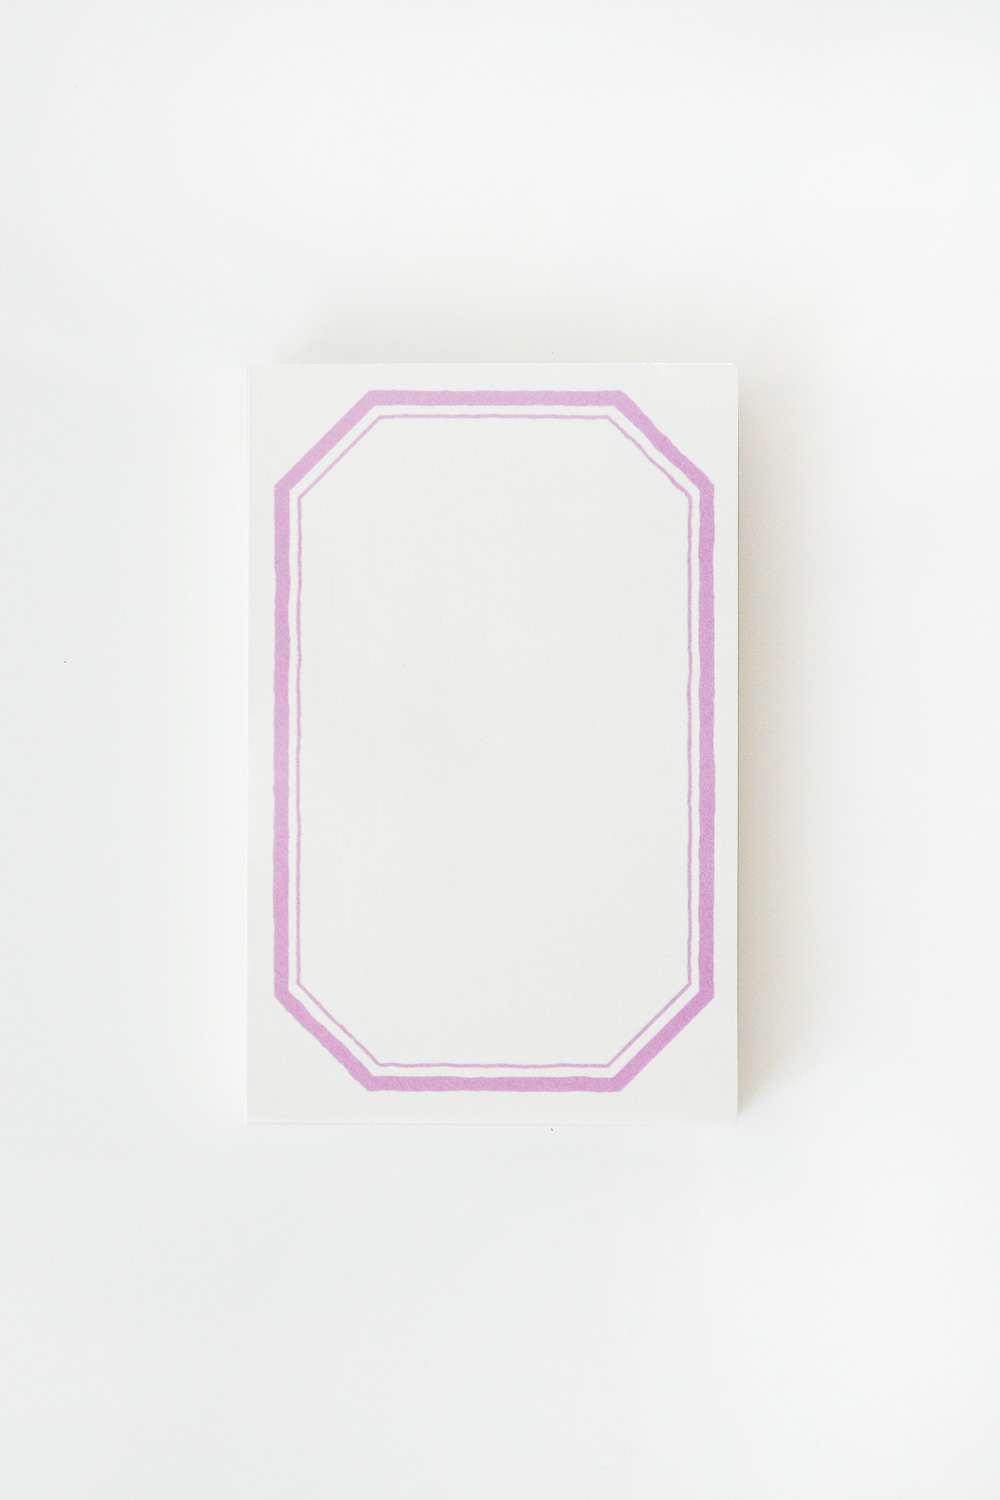 LABEL Notepad (Pink)